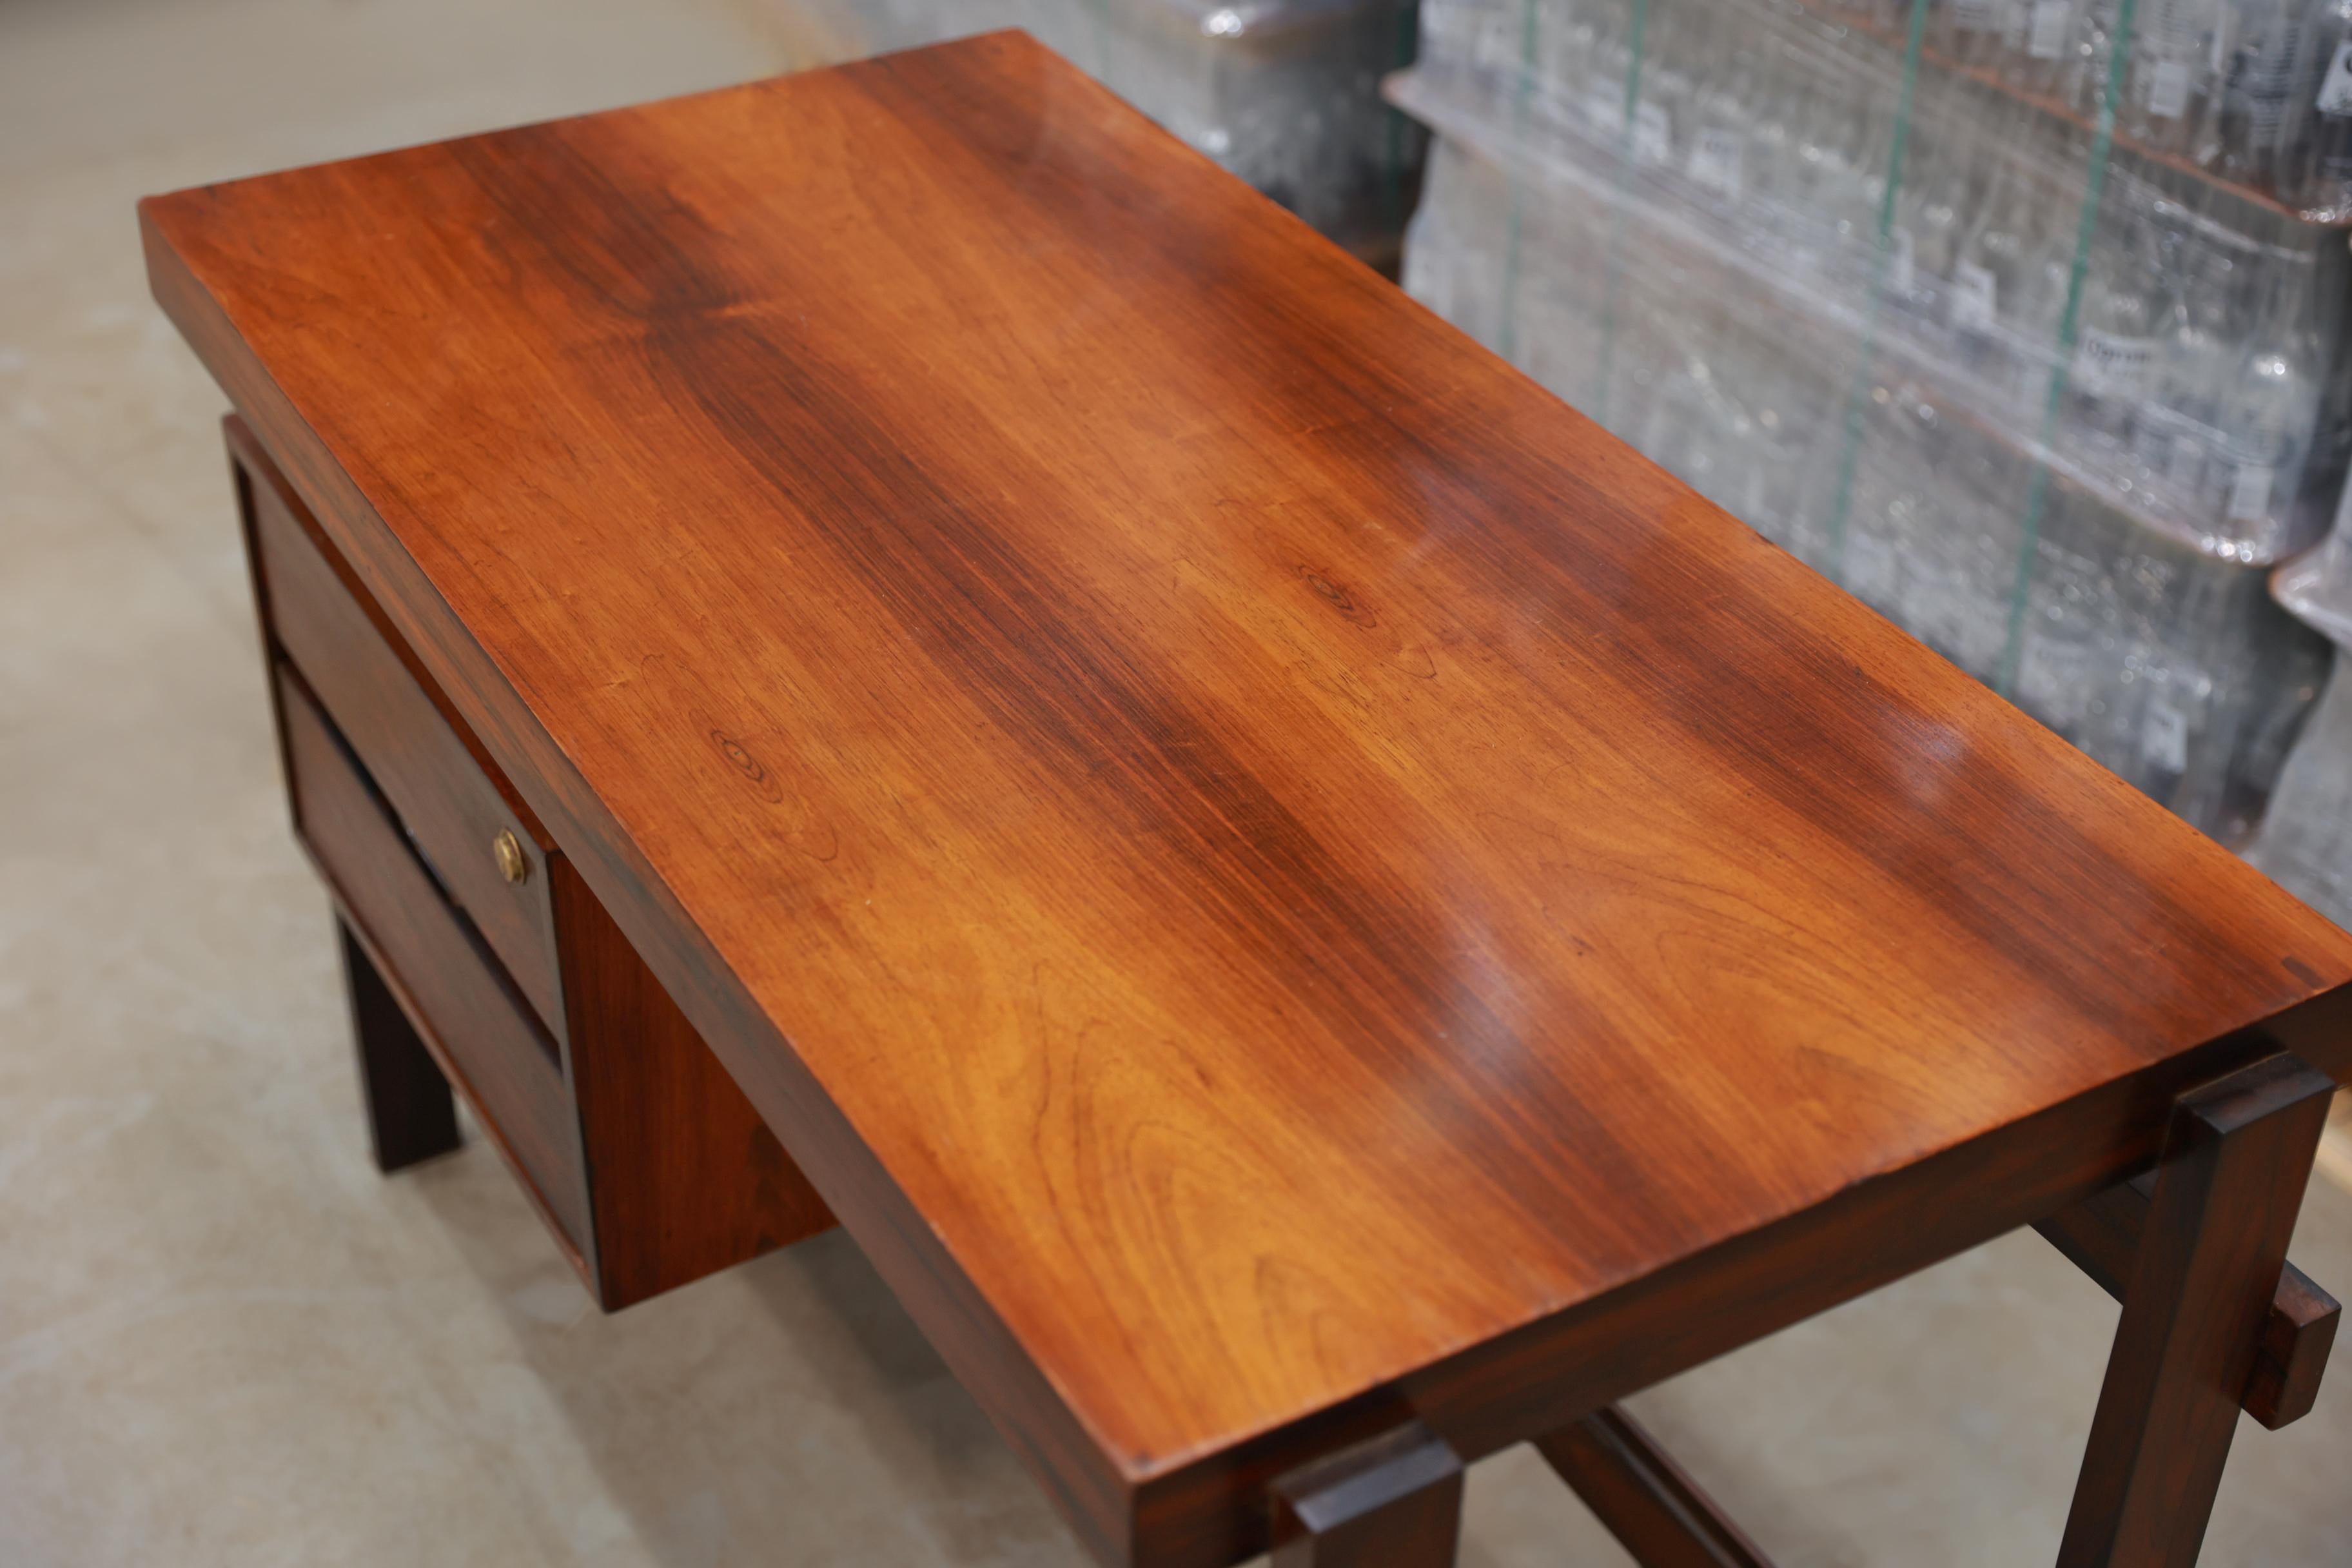 Available today, this Desk in Hardwood with Two Shelves by Fatima, 1960s, Brazil

This desk was designed by Fatima Arquitetura de Interiores (c. 1960s). The top of the desk is in Brazilian rosewood (Jacaranda) and has a light finish. It has two